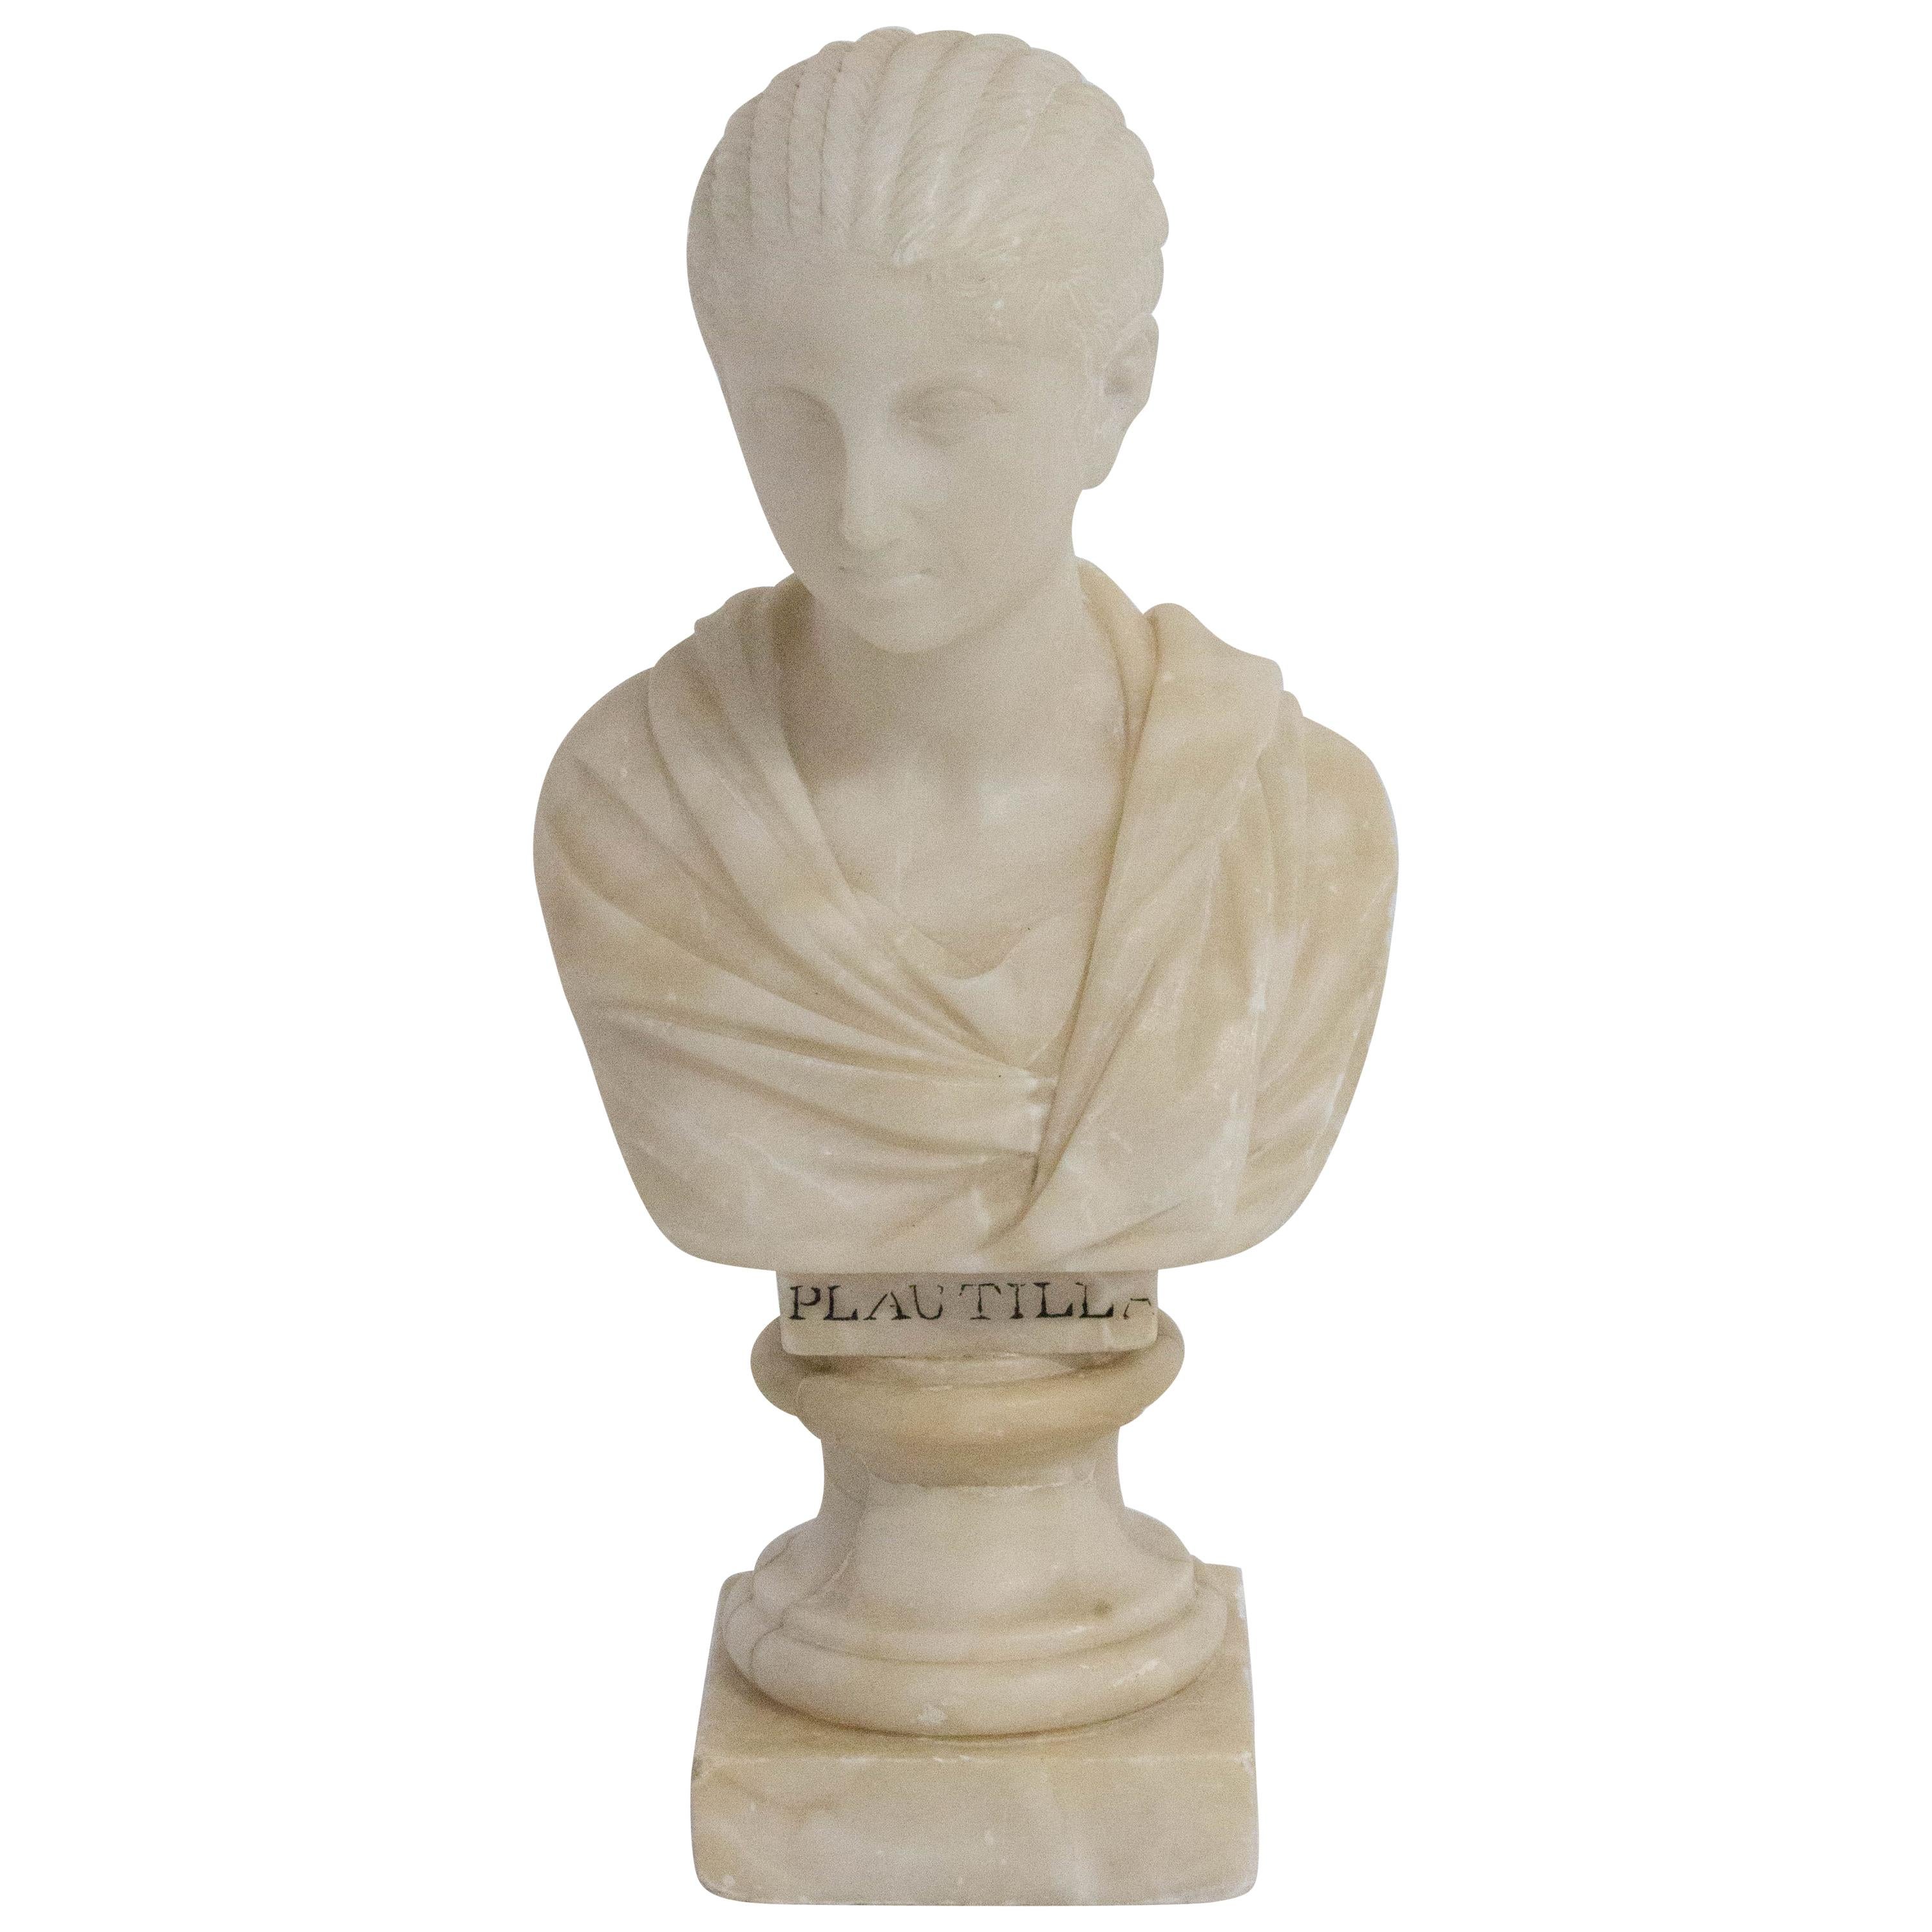 Art Deco Albaster Plautilla Bust Neoclassic, Early 20th Century For Sale